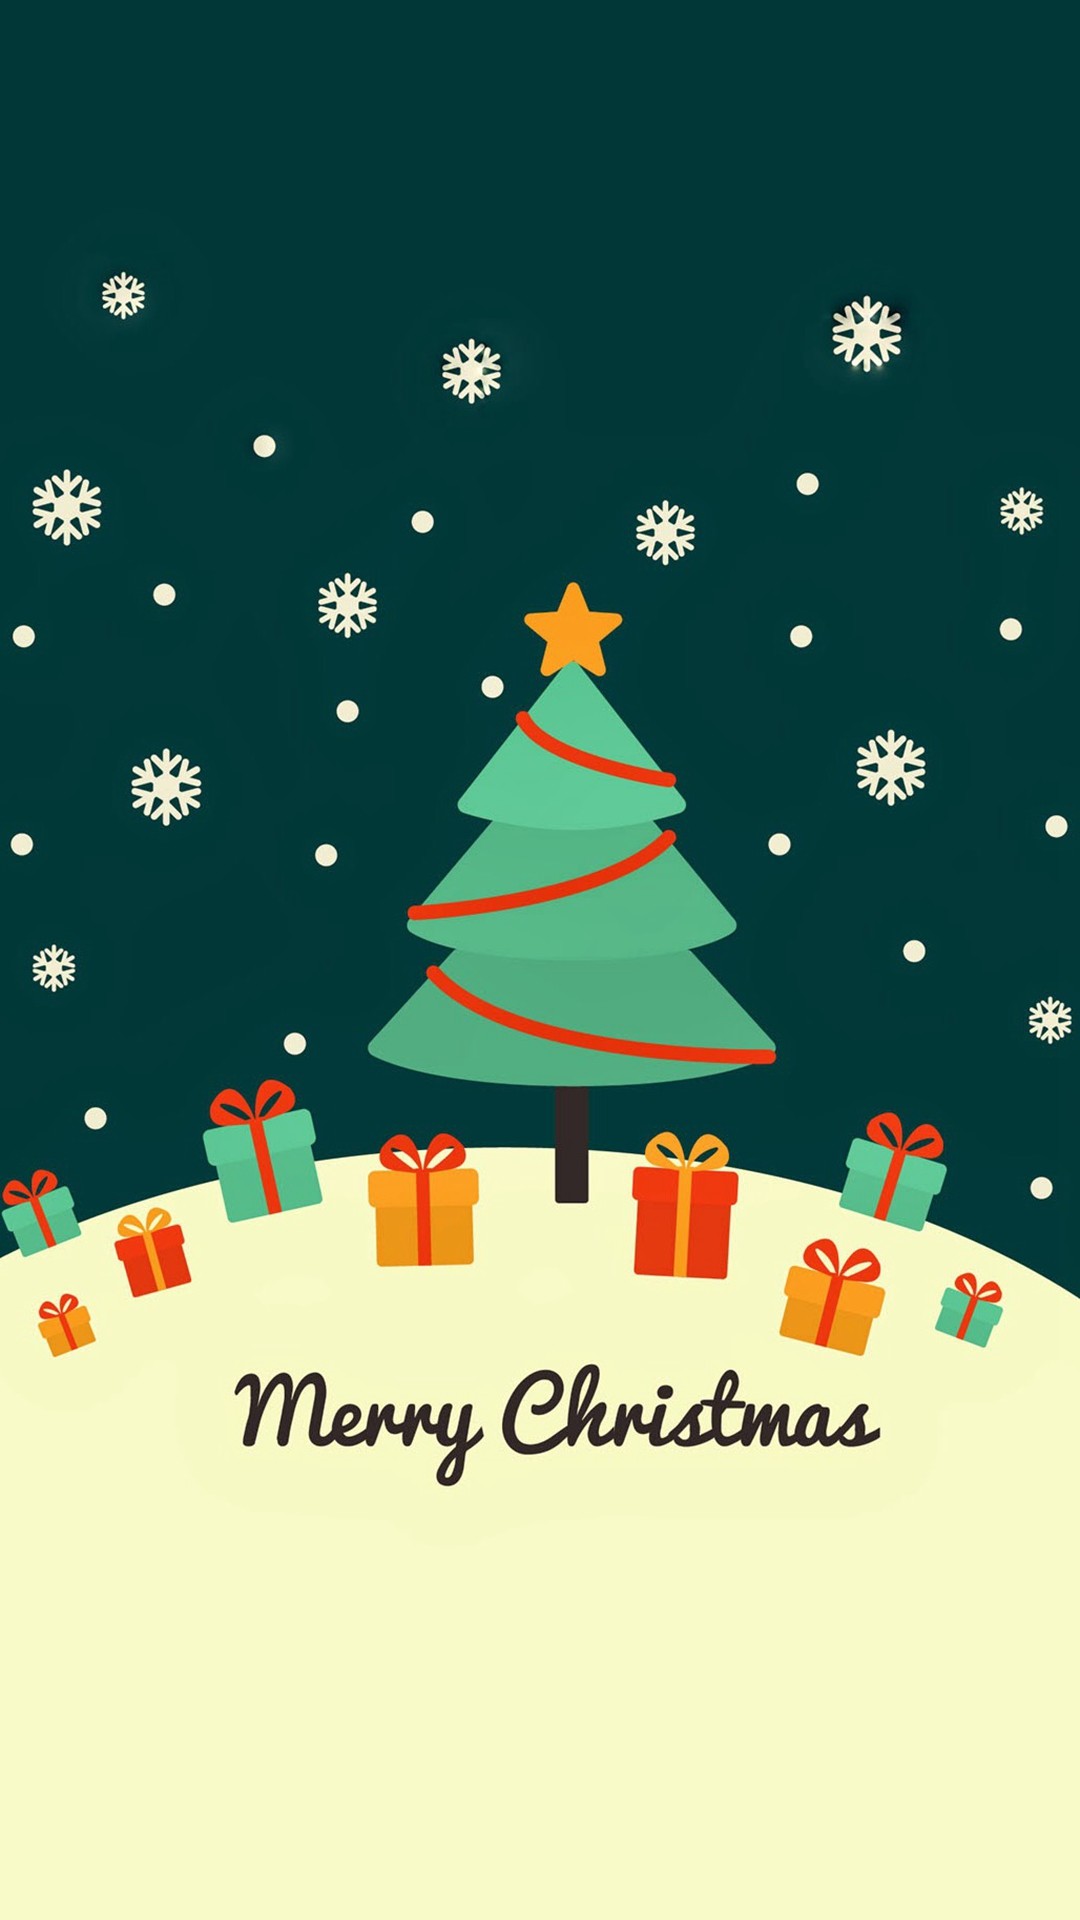 1080x1920 Cute Christmas Card Greeting iPhone 7 Wallpaper Download iPhone .